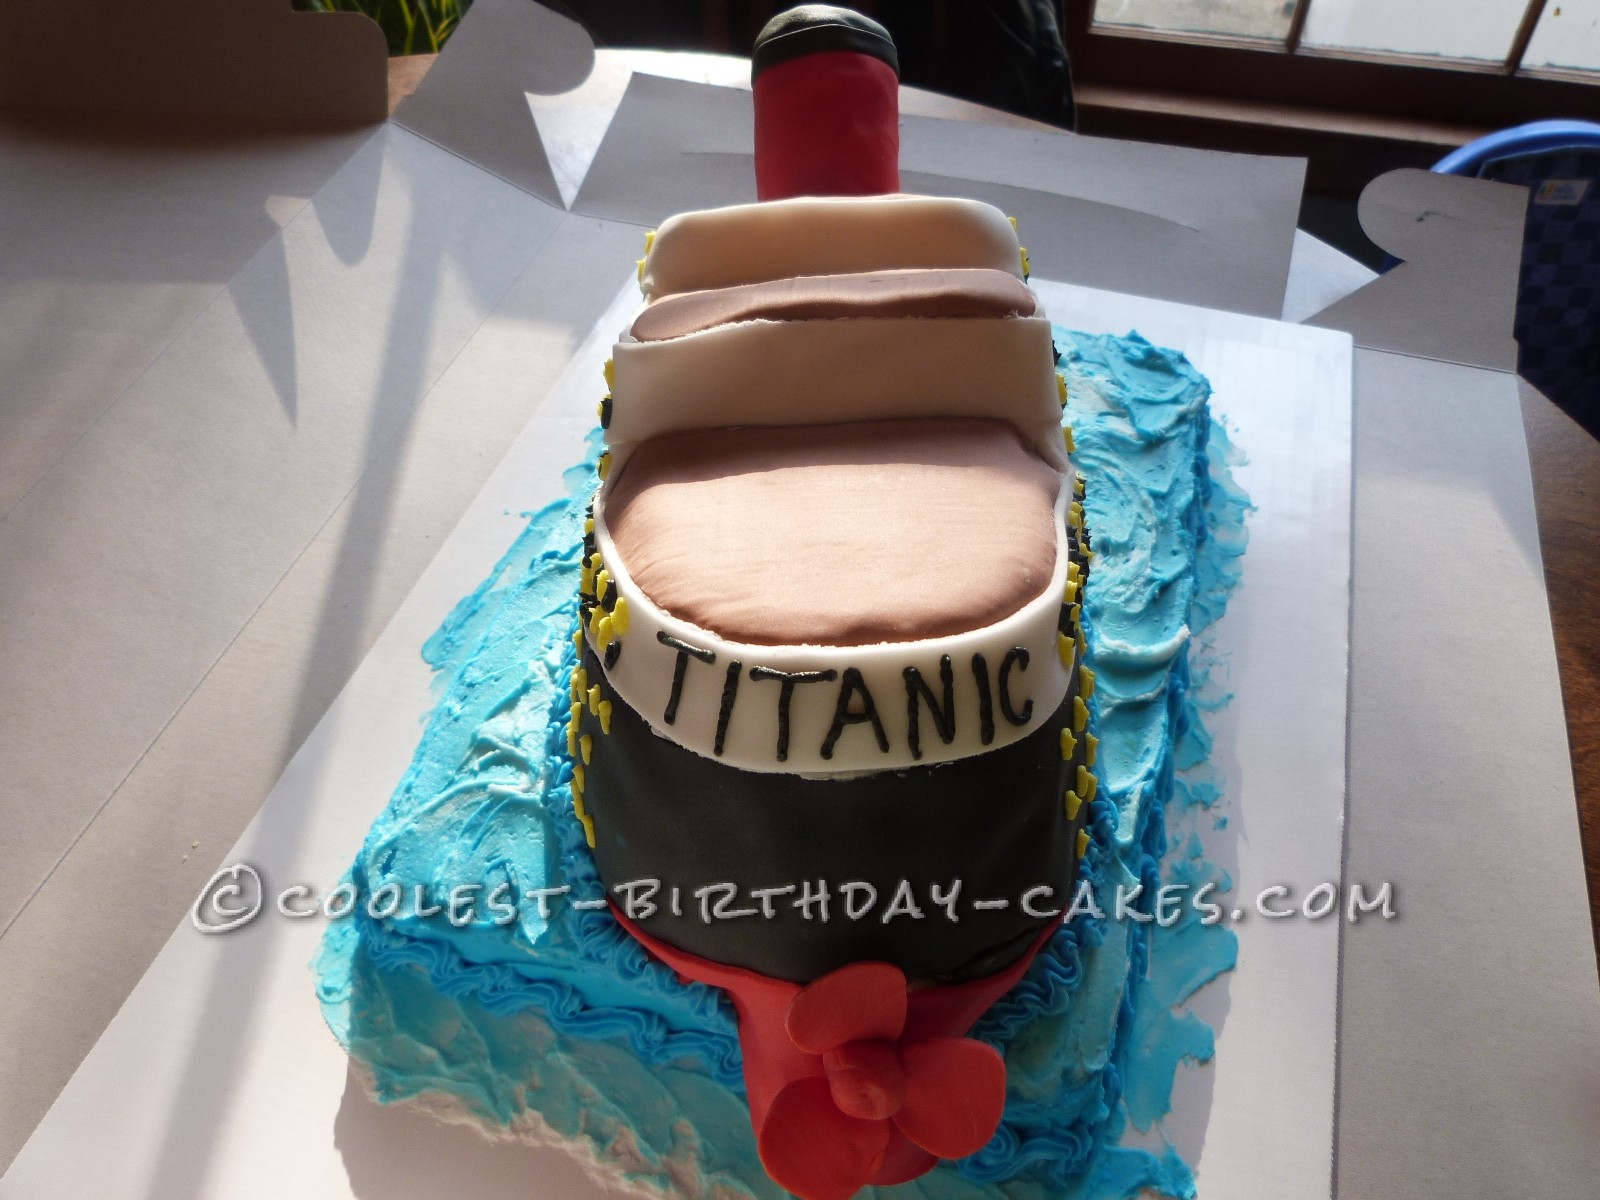 the back of the Titanic with gum paste propeller